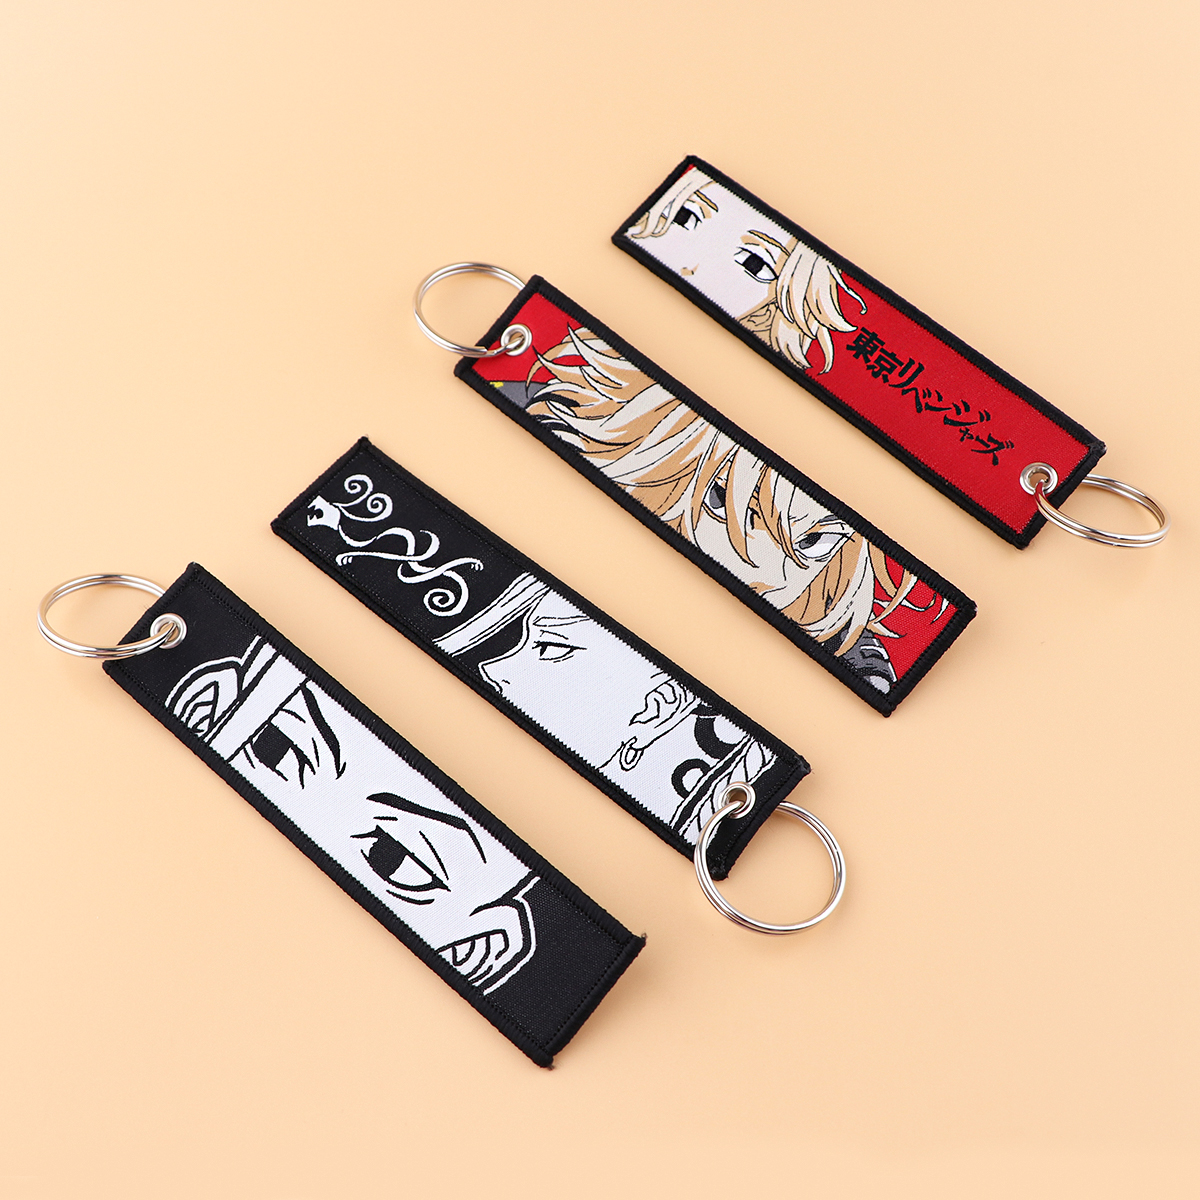 Japanese Anime Embroidered Keychain Key Tag Tokyo Revengers Key Fobs Motorcycles Cars Backpack Chaveiro Fashion Key 2 - Tokyo Revengers Merch